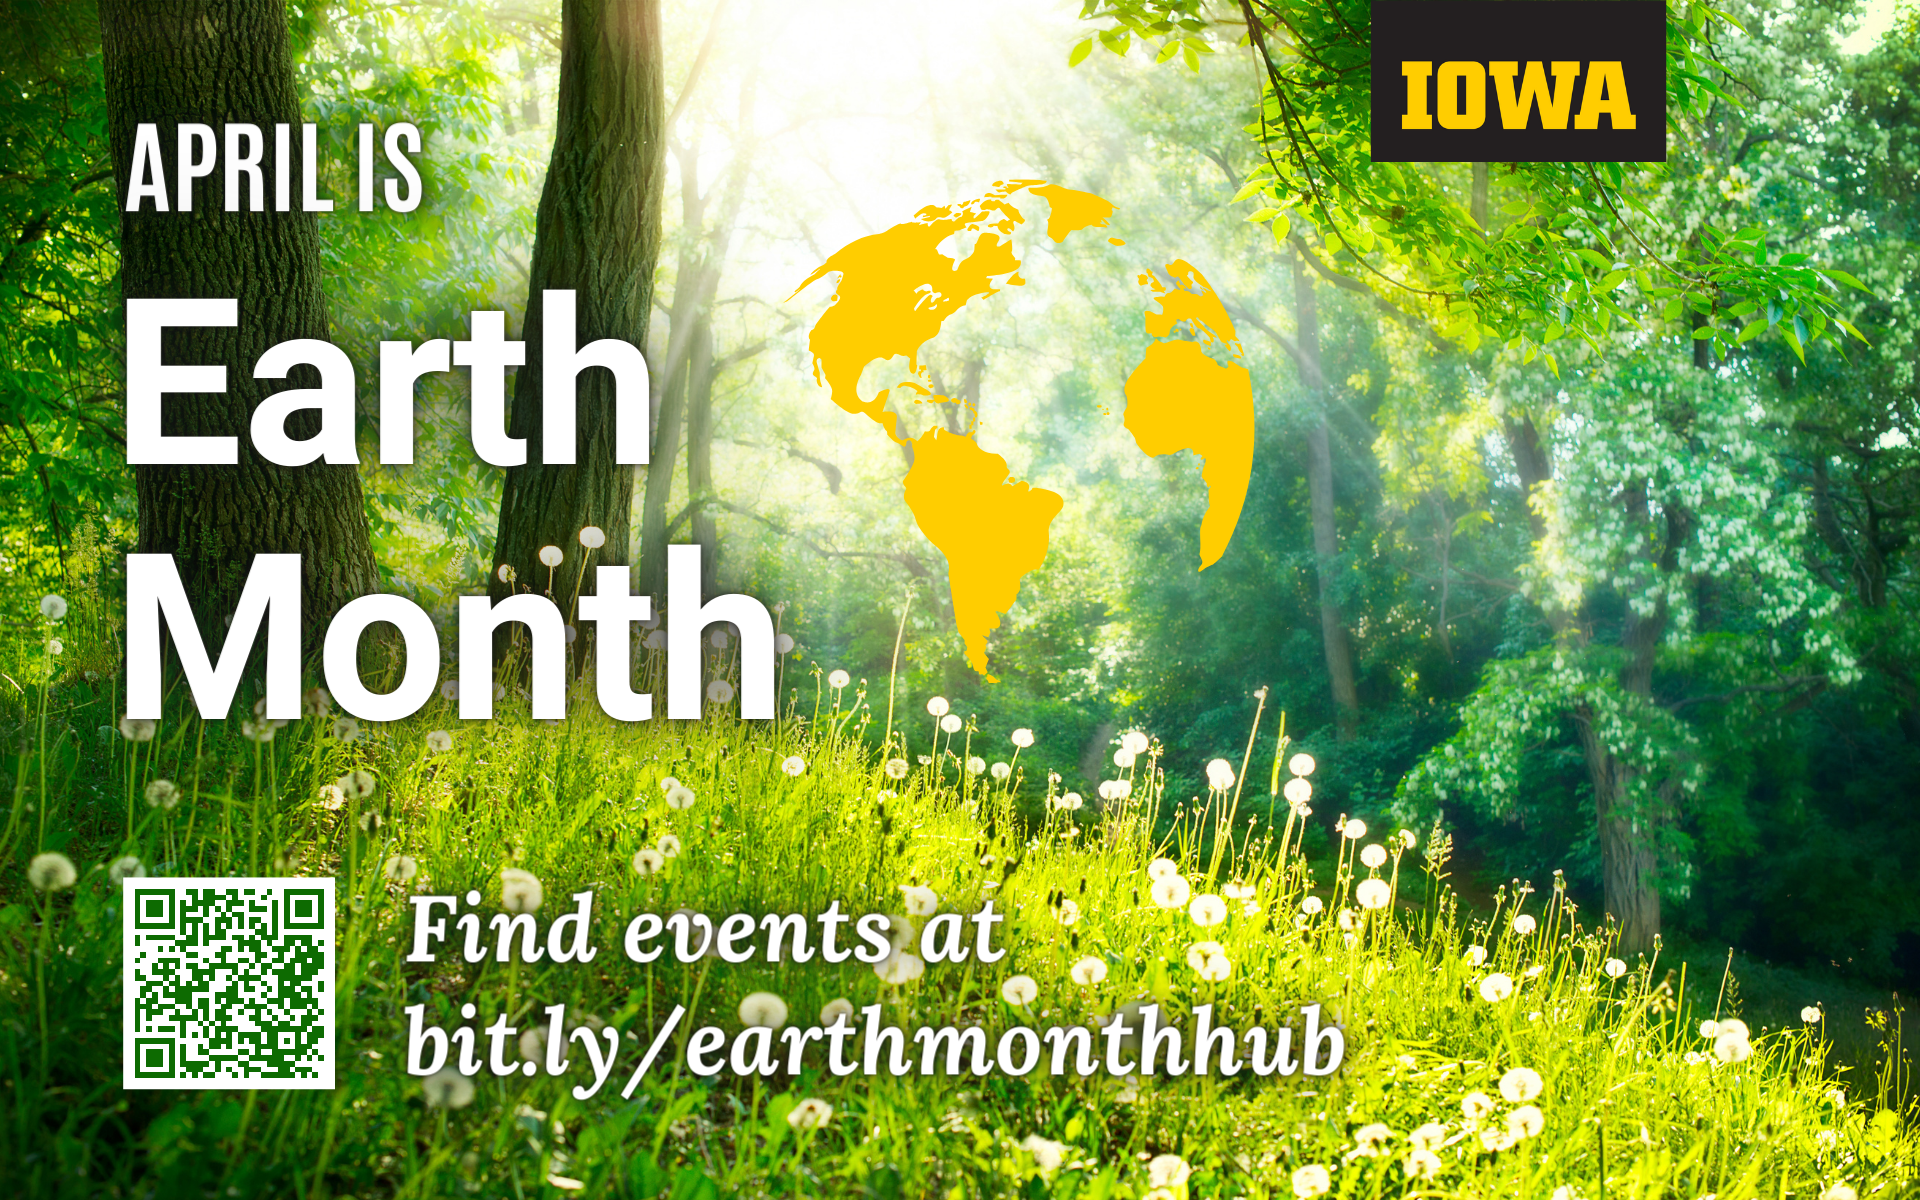 April is Earth Month - Find events at bit.ly/earthmonthhub